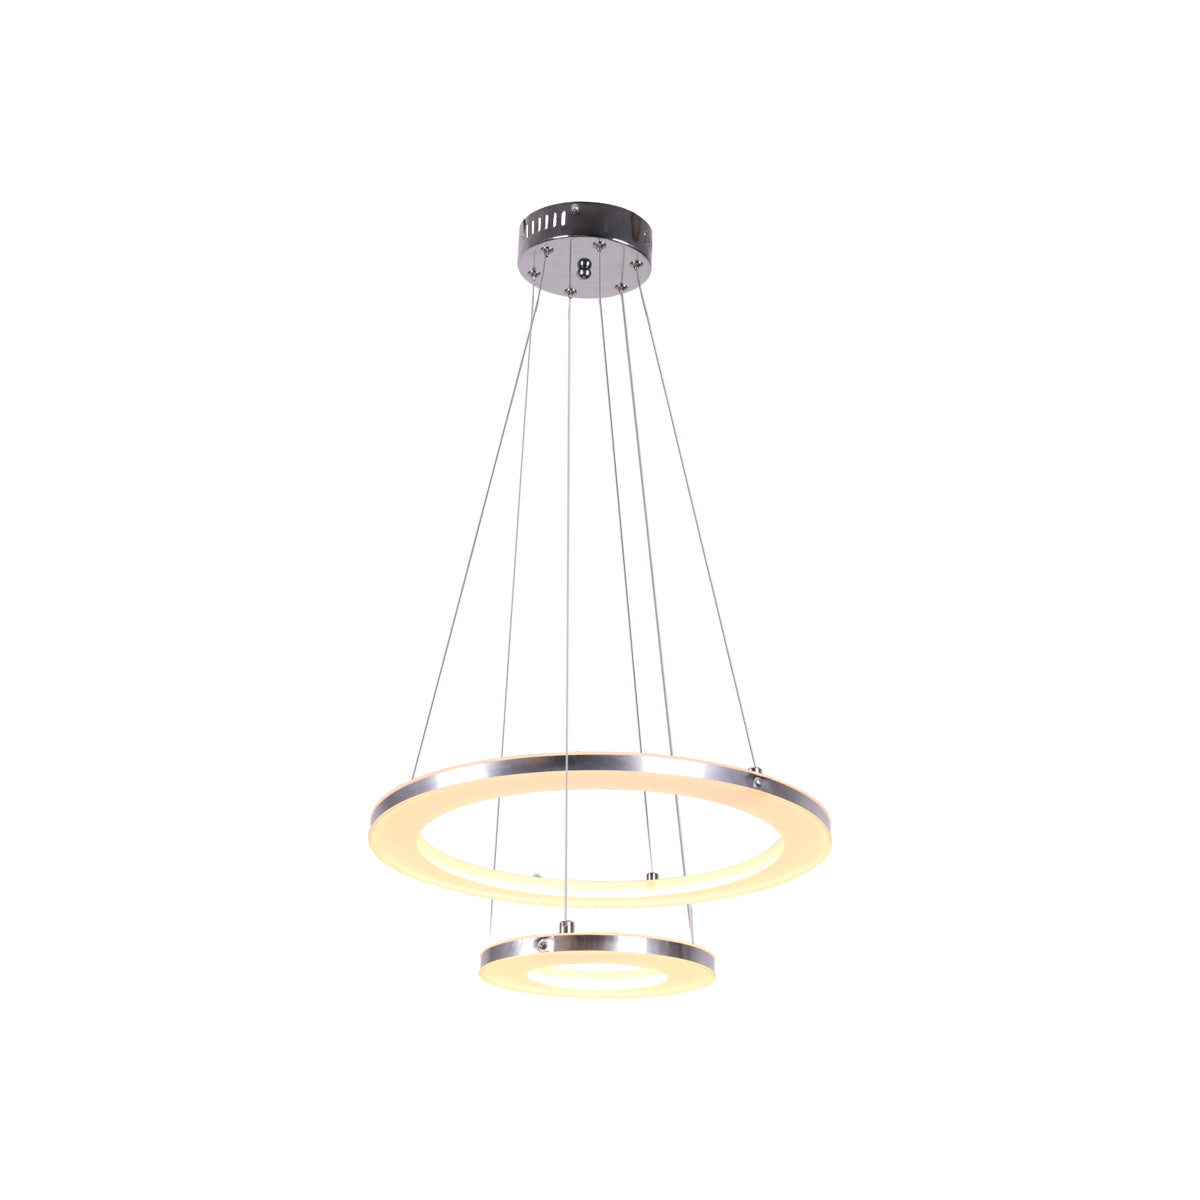 Designer Cylindrical Light In Hanging Ring Ceiling Light - WallMantra